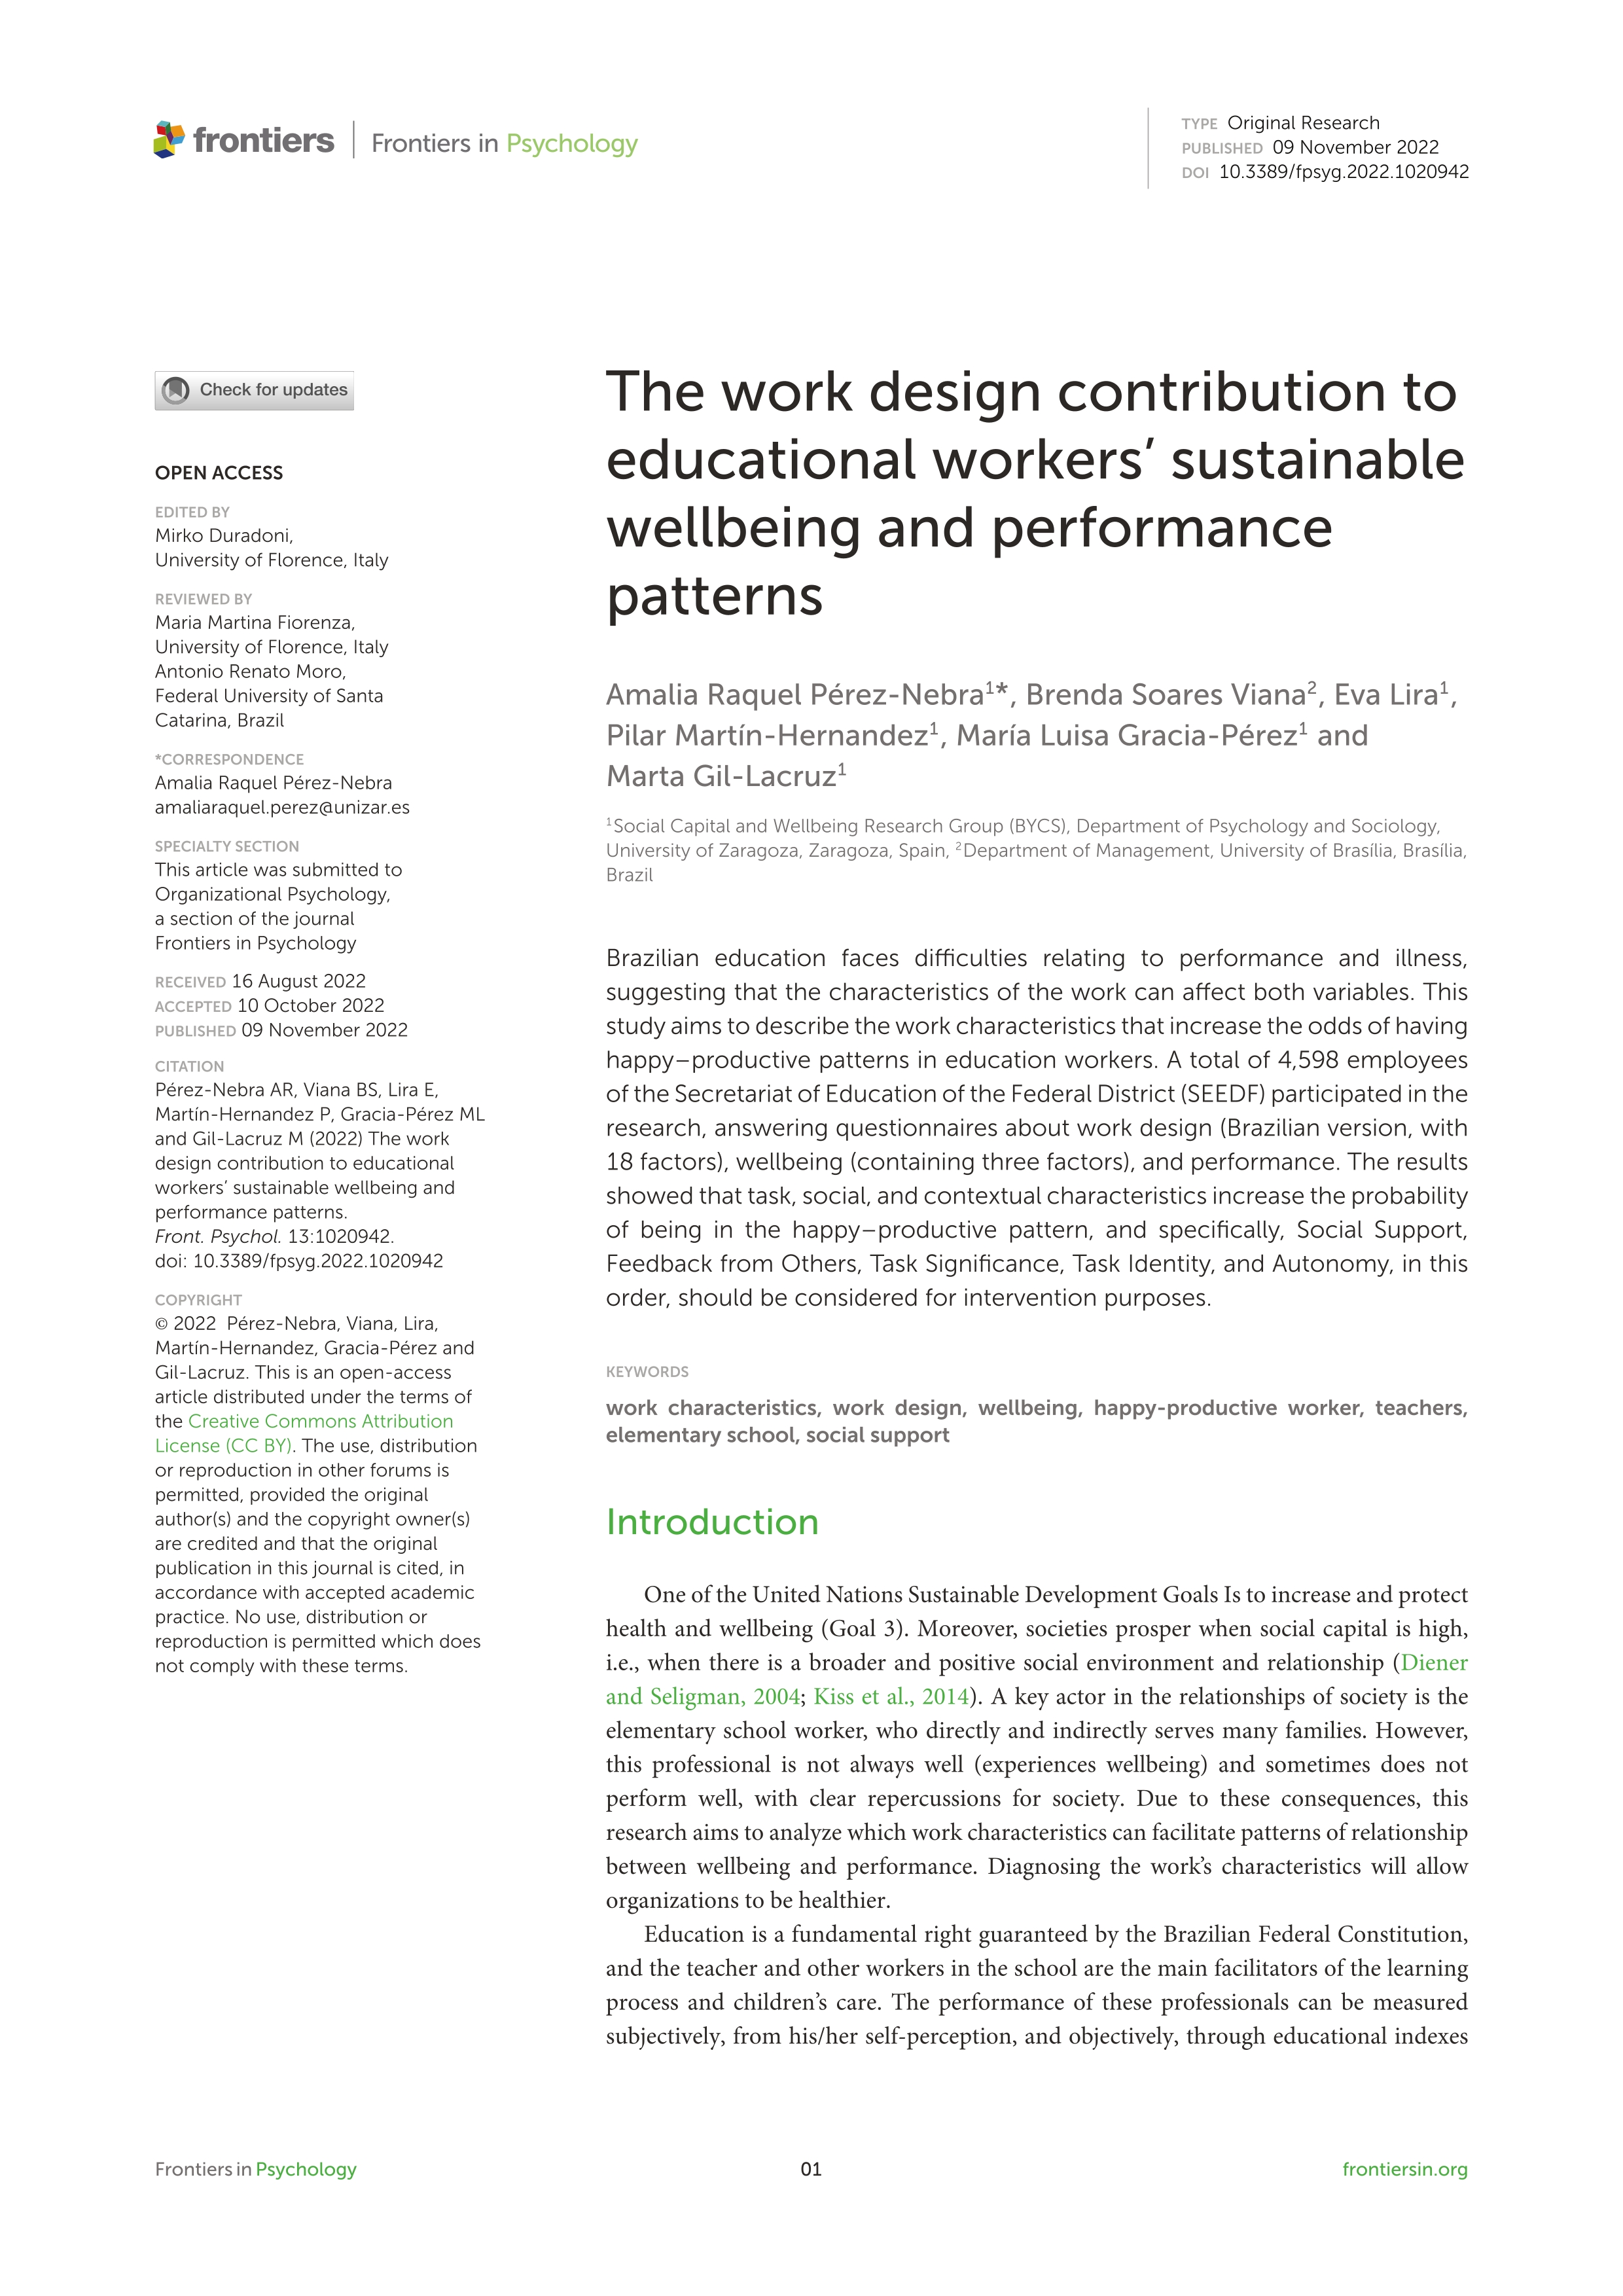 The work design contribution to educational workers' sustainable wellbeing and performance patterns